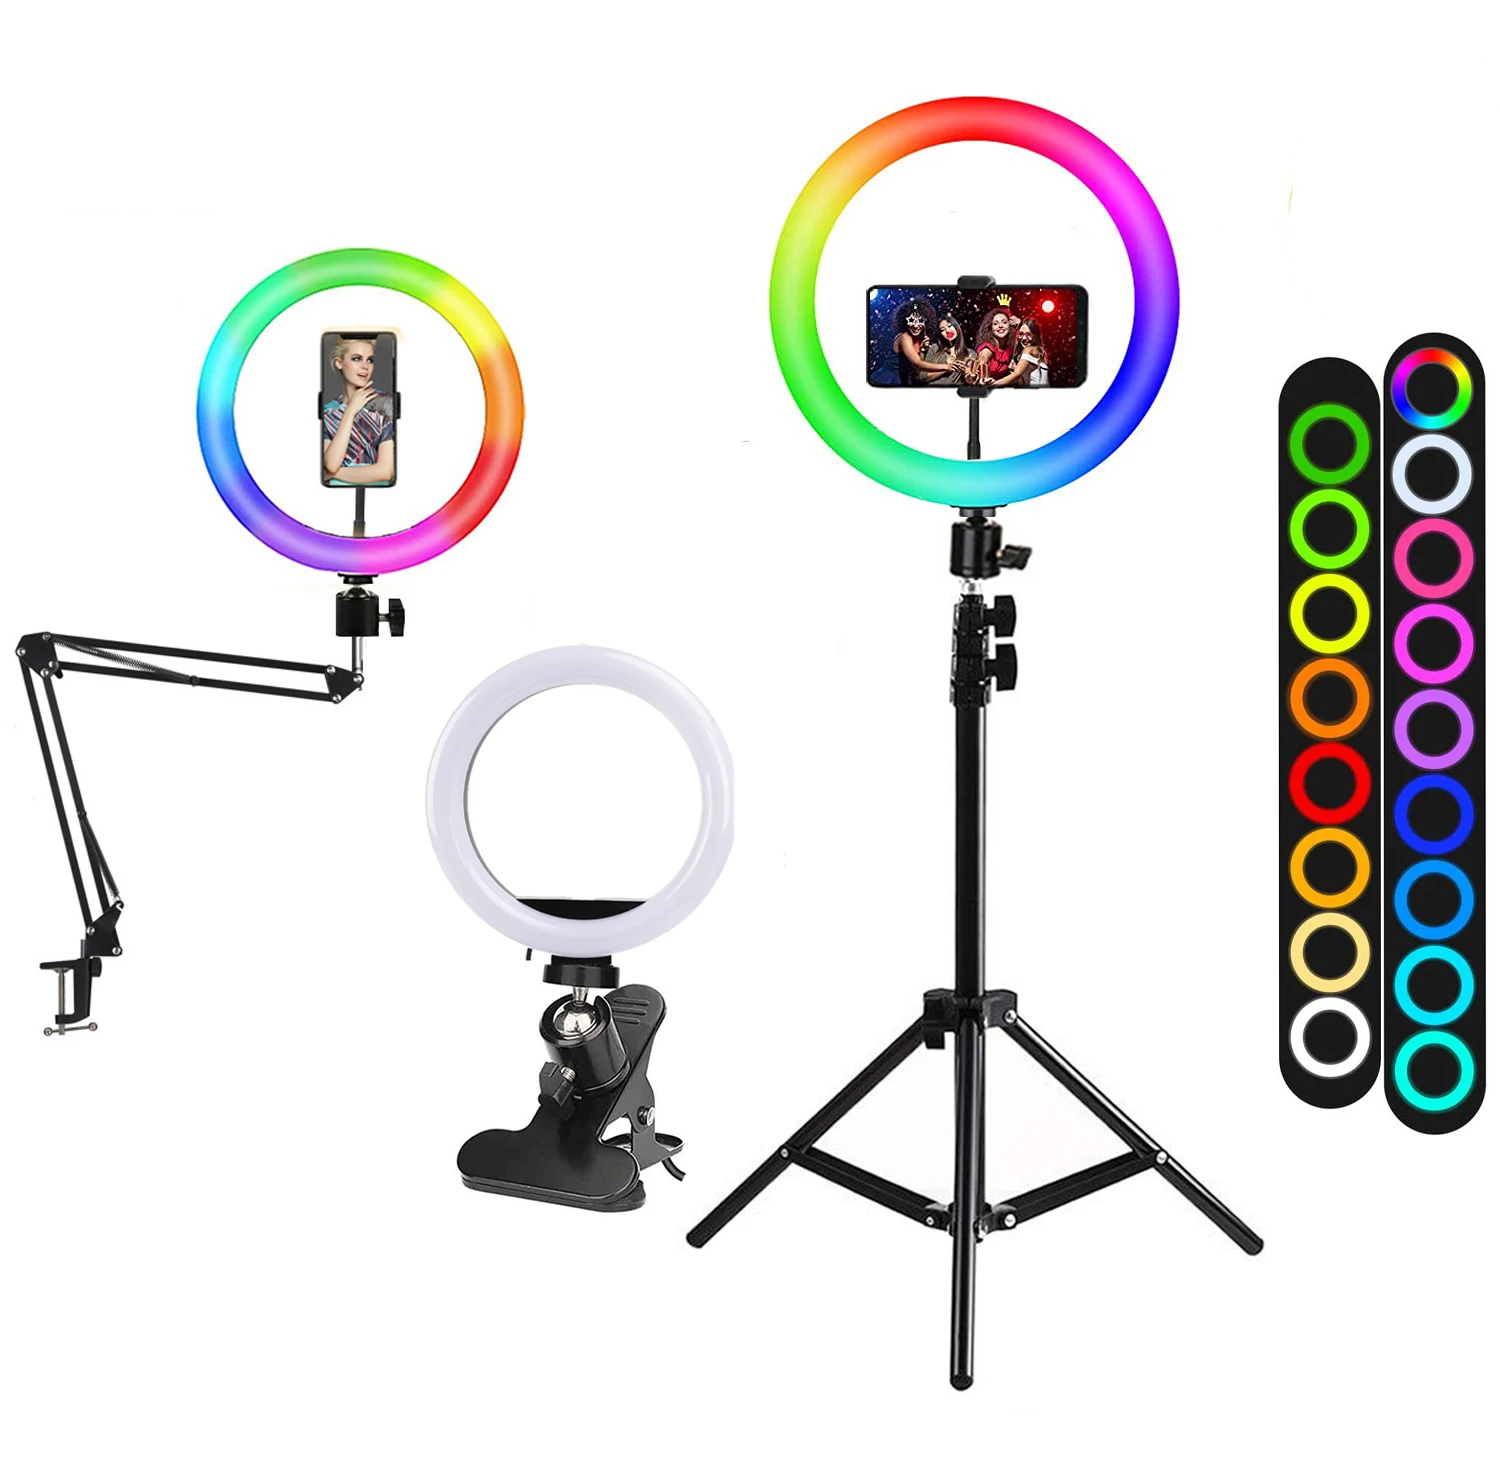 

26cm/10inch RGB LED Selfie Ring Light Dimmable Round Ring Lamp with Tripod Video Camera ringlight For Phone Studio Live YouTube